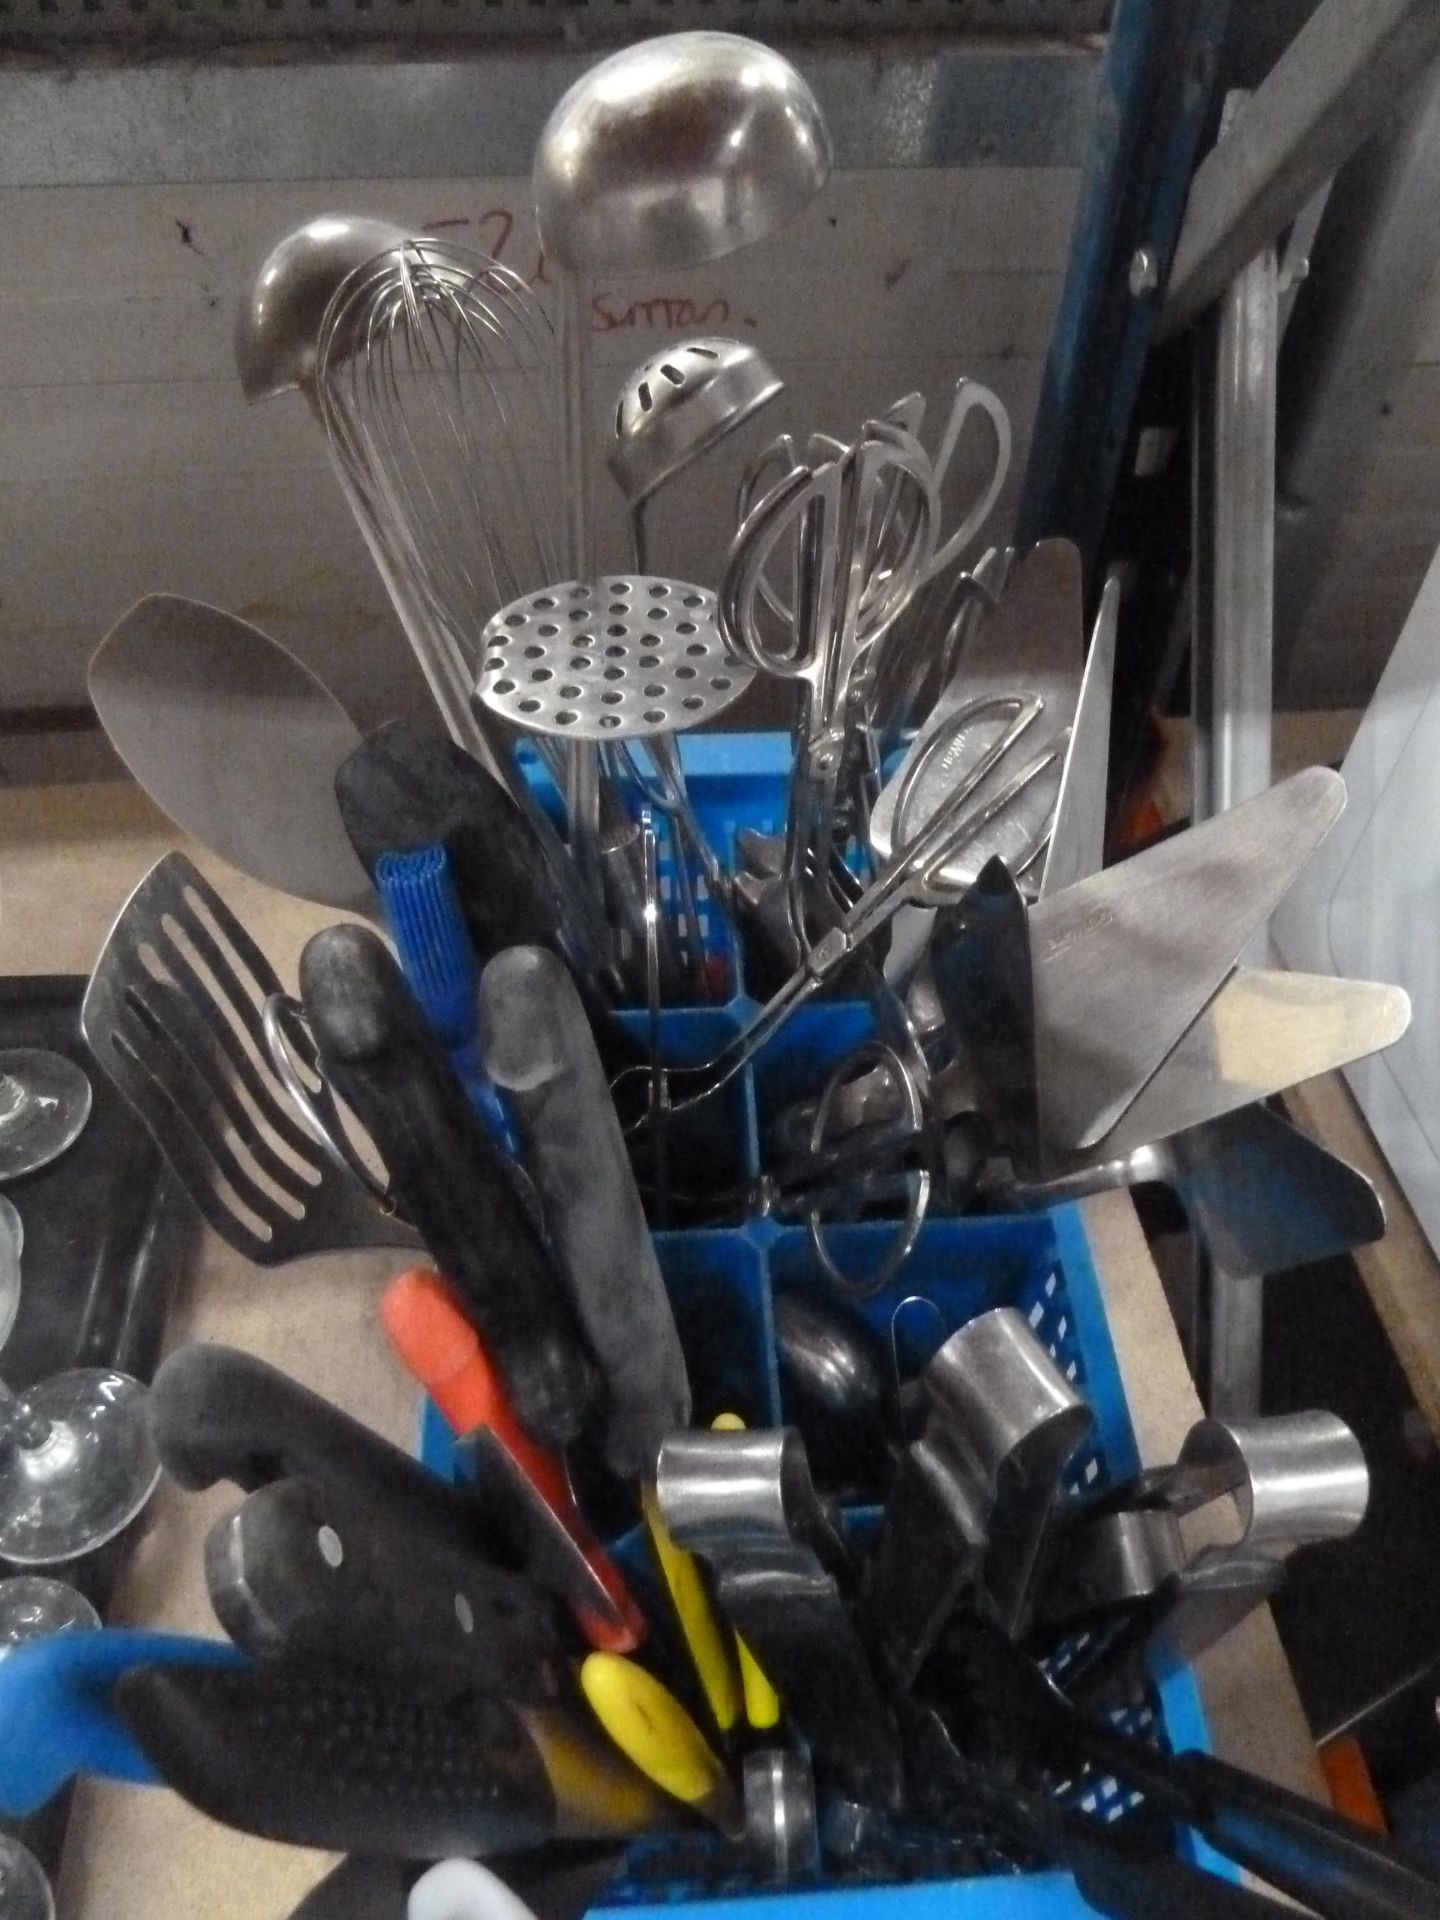 *large assortment of chefs knives and utensils